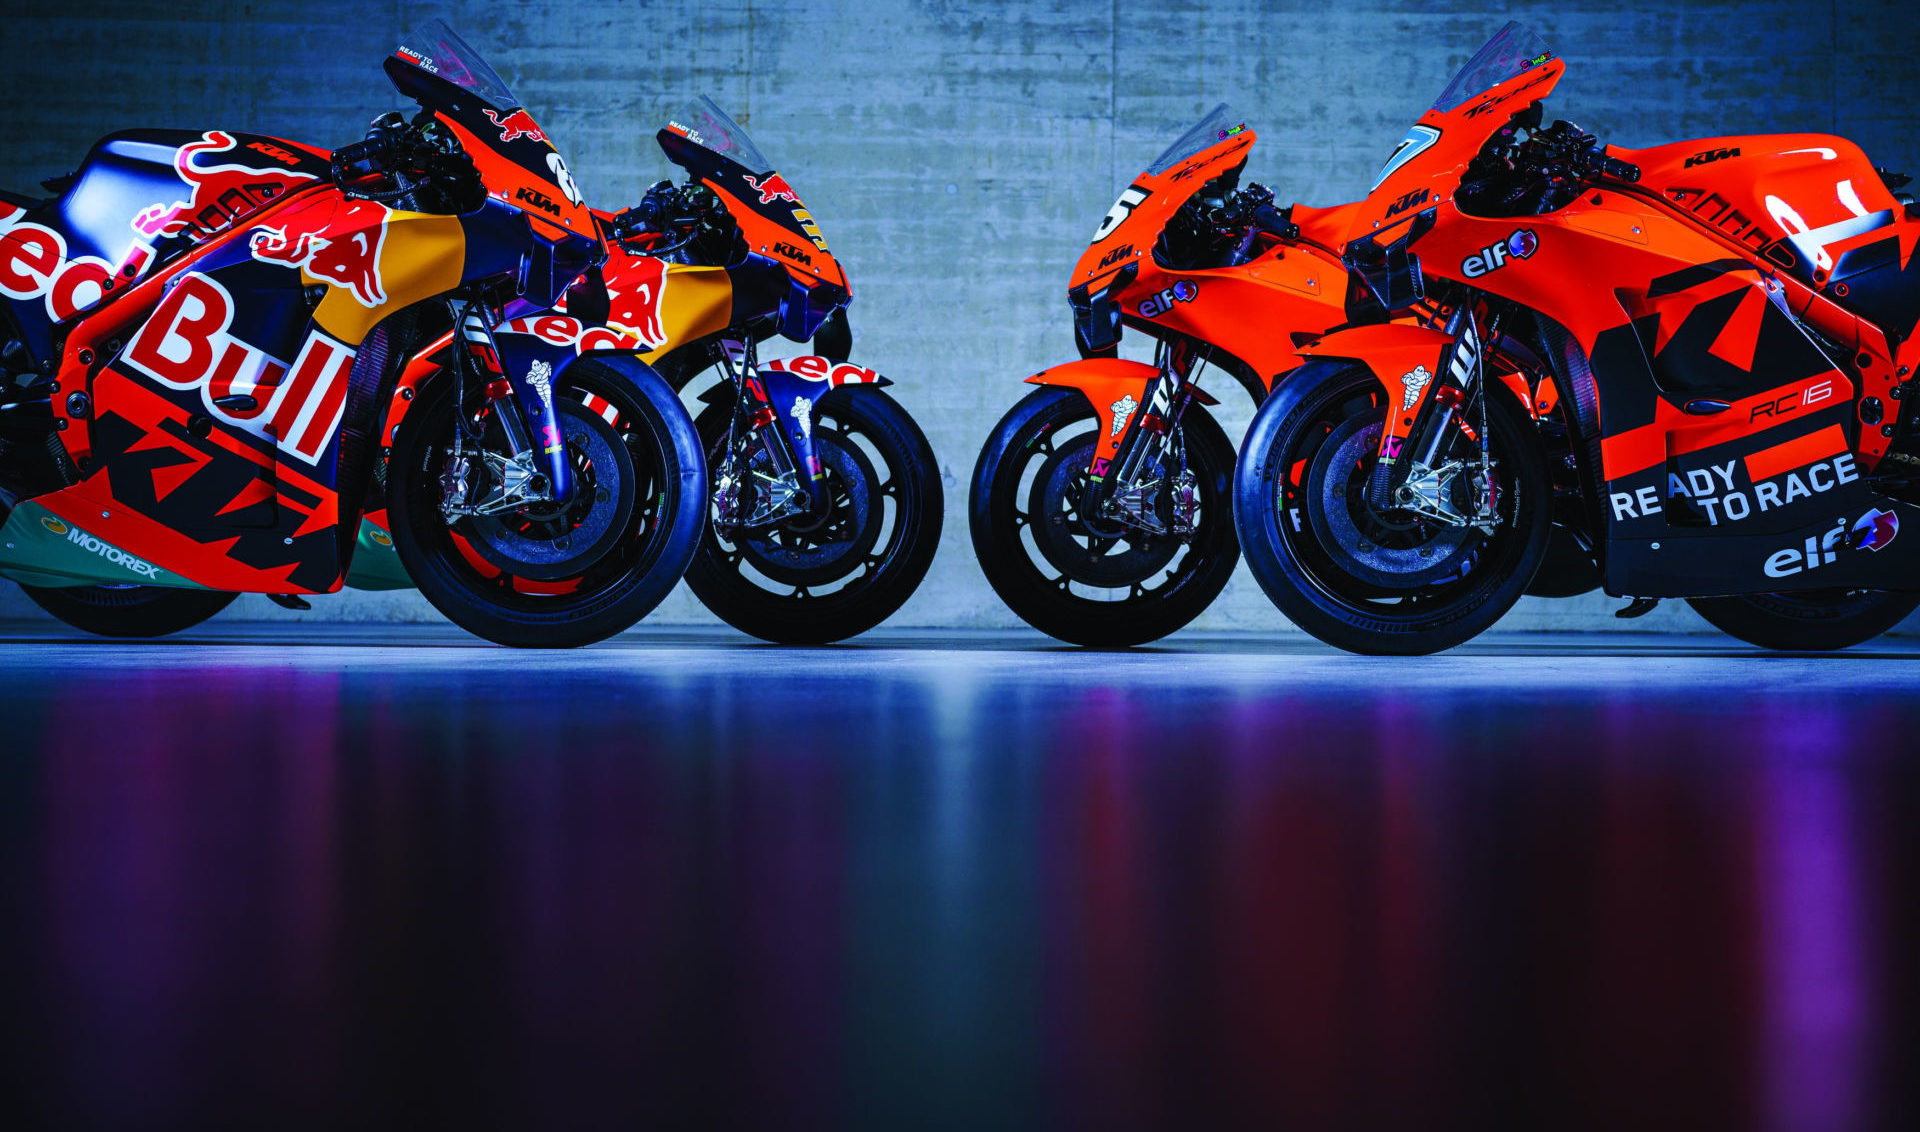 The Red Bull KTM MotoGP racebikes (left) and the Tech3 KTM Factory Racing MotoGP racebikes (right). Photo by Philip Platzer, courtesy KTM Factory Racing.